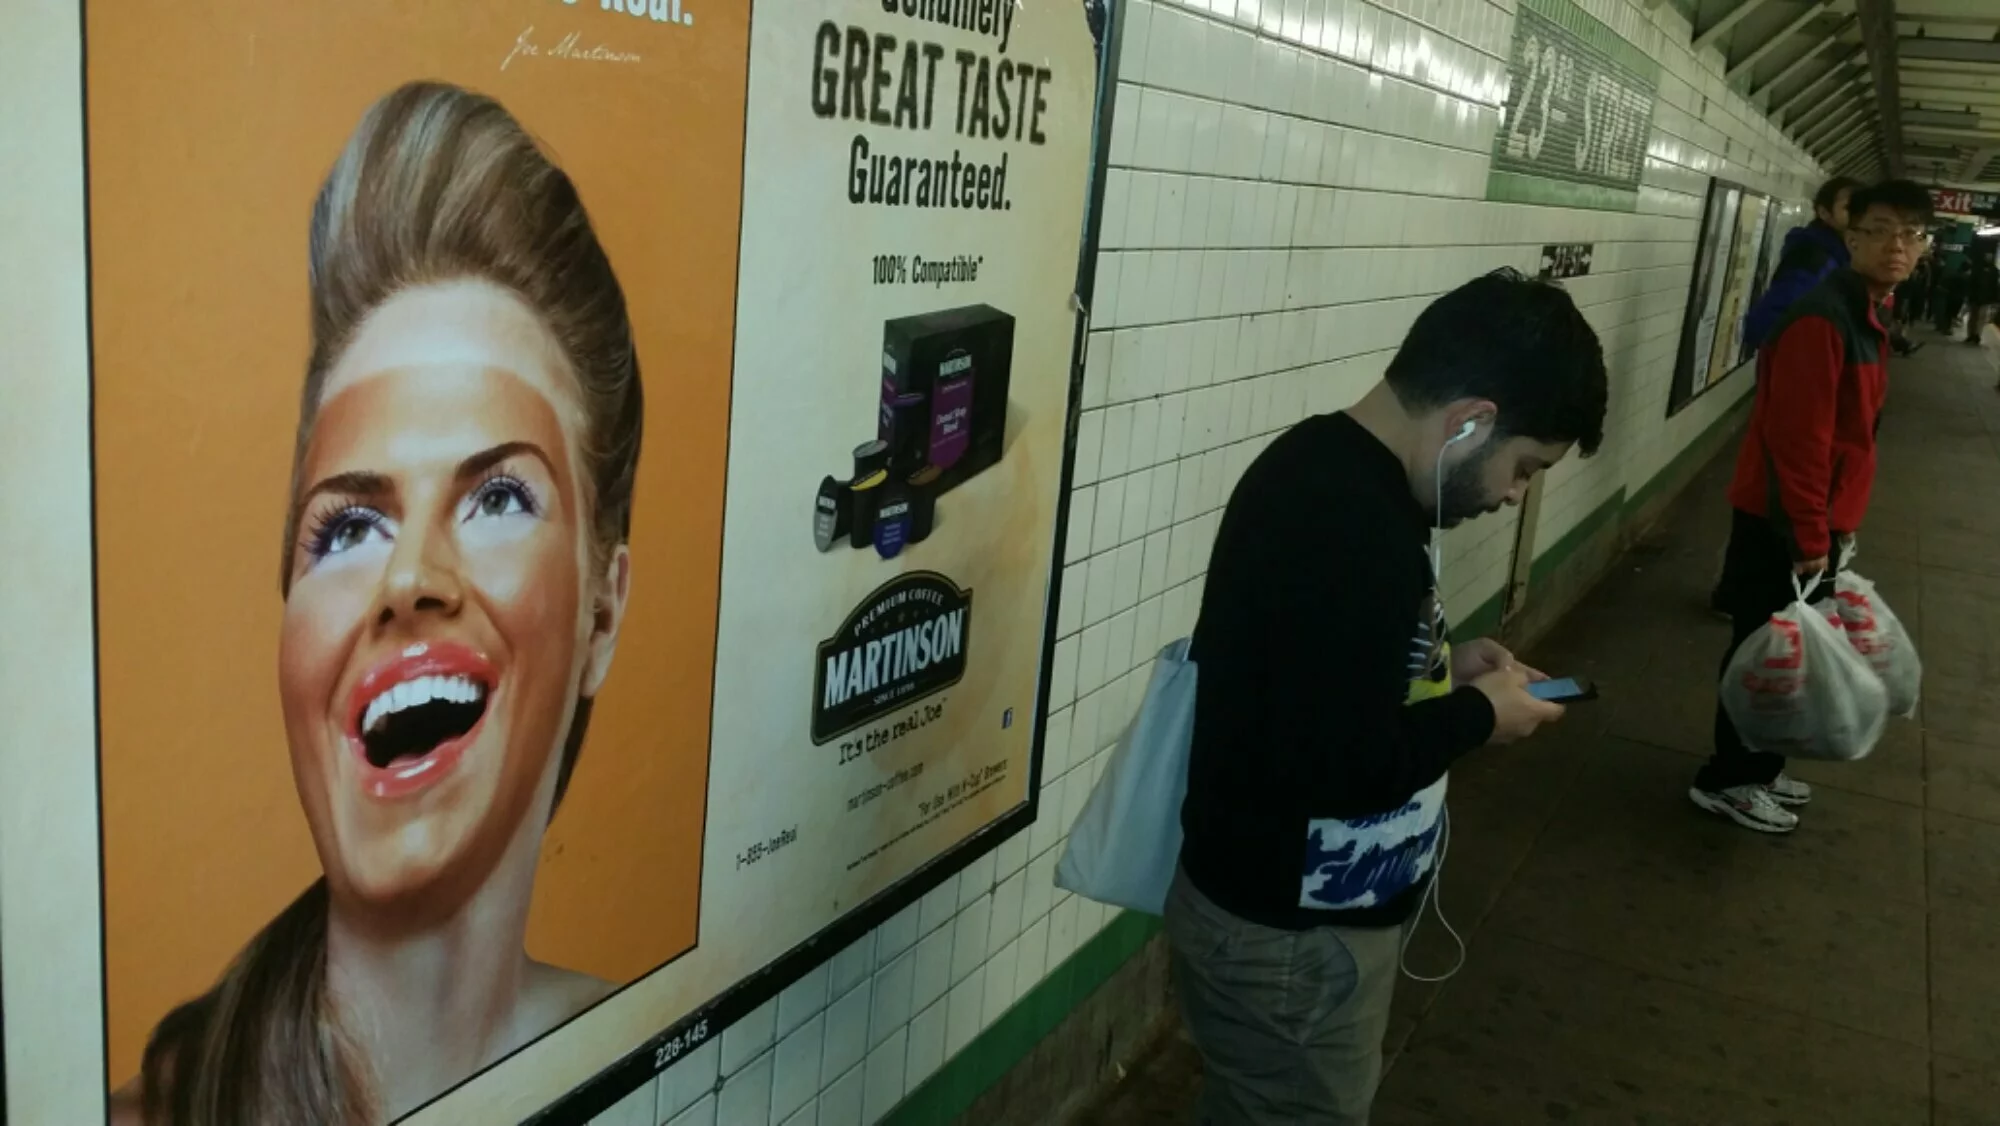 wpid 20131116 191017 MARTINSON COFFEE INSPIRED BY BLACKFACE FOR NYC SUBWAY AD (PHOTOS)